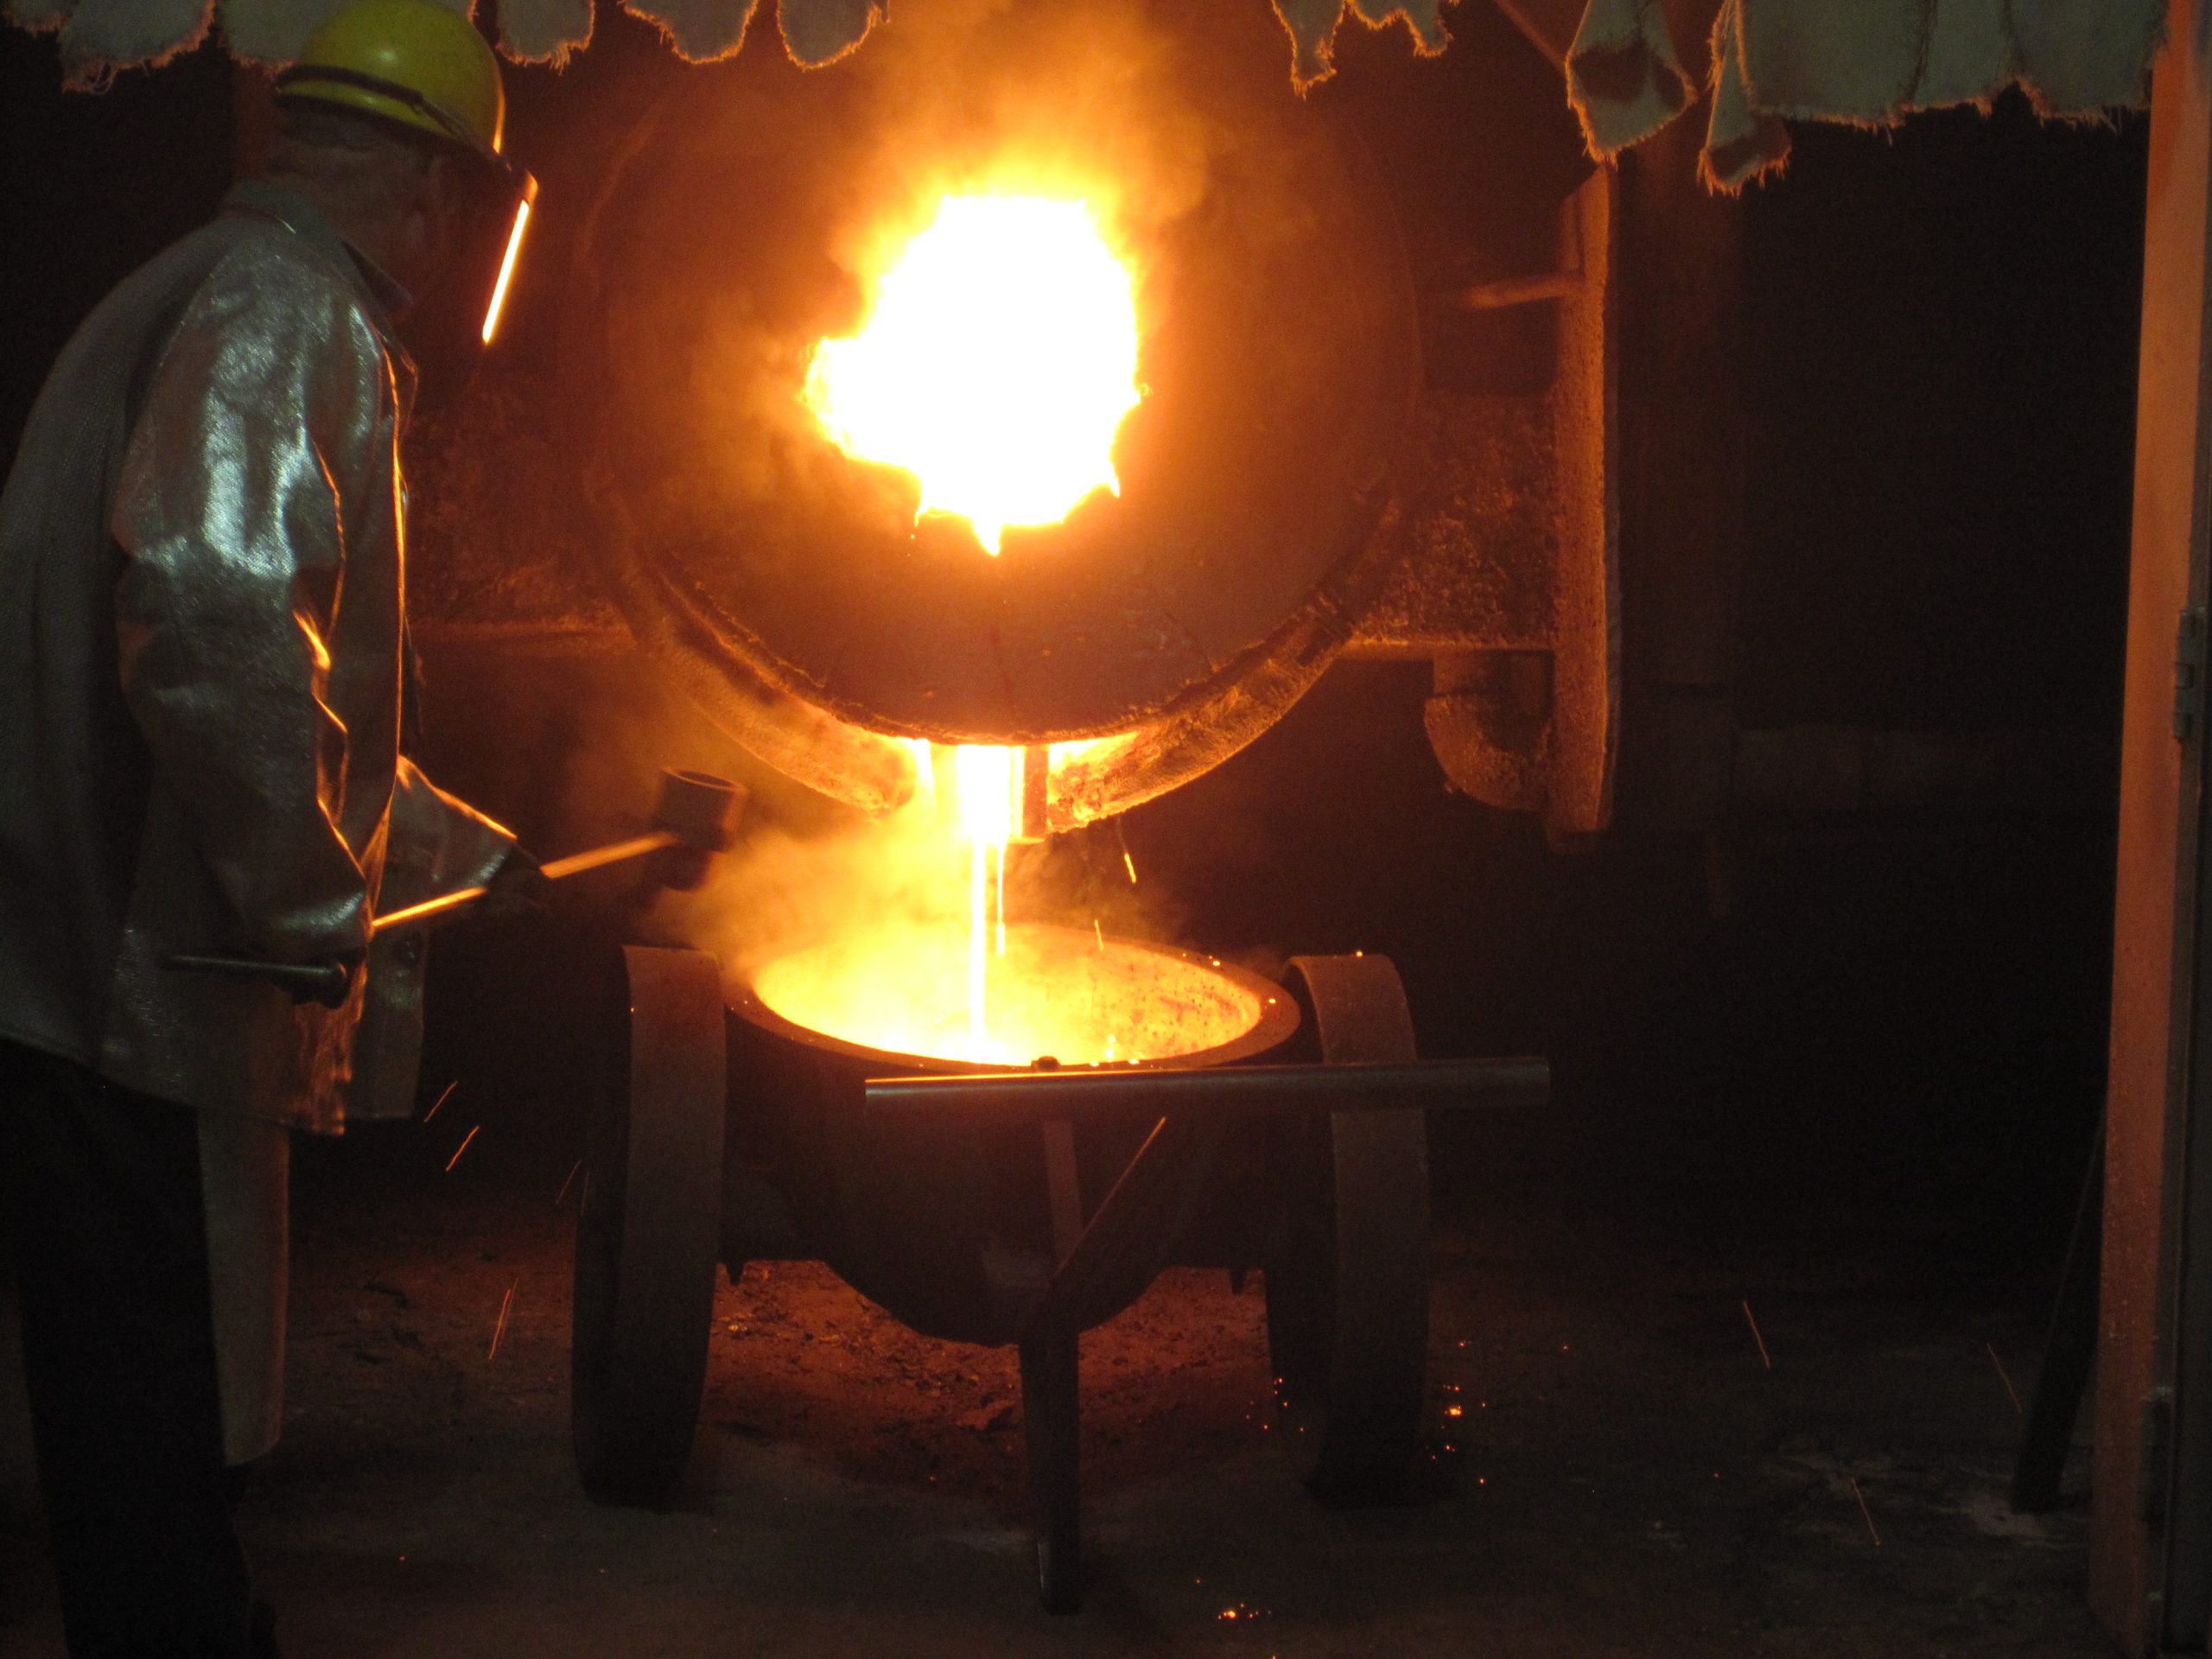 Molten metal being poured from a crucible